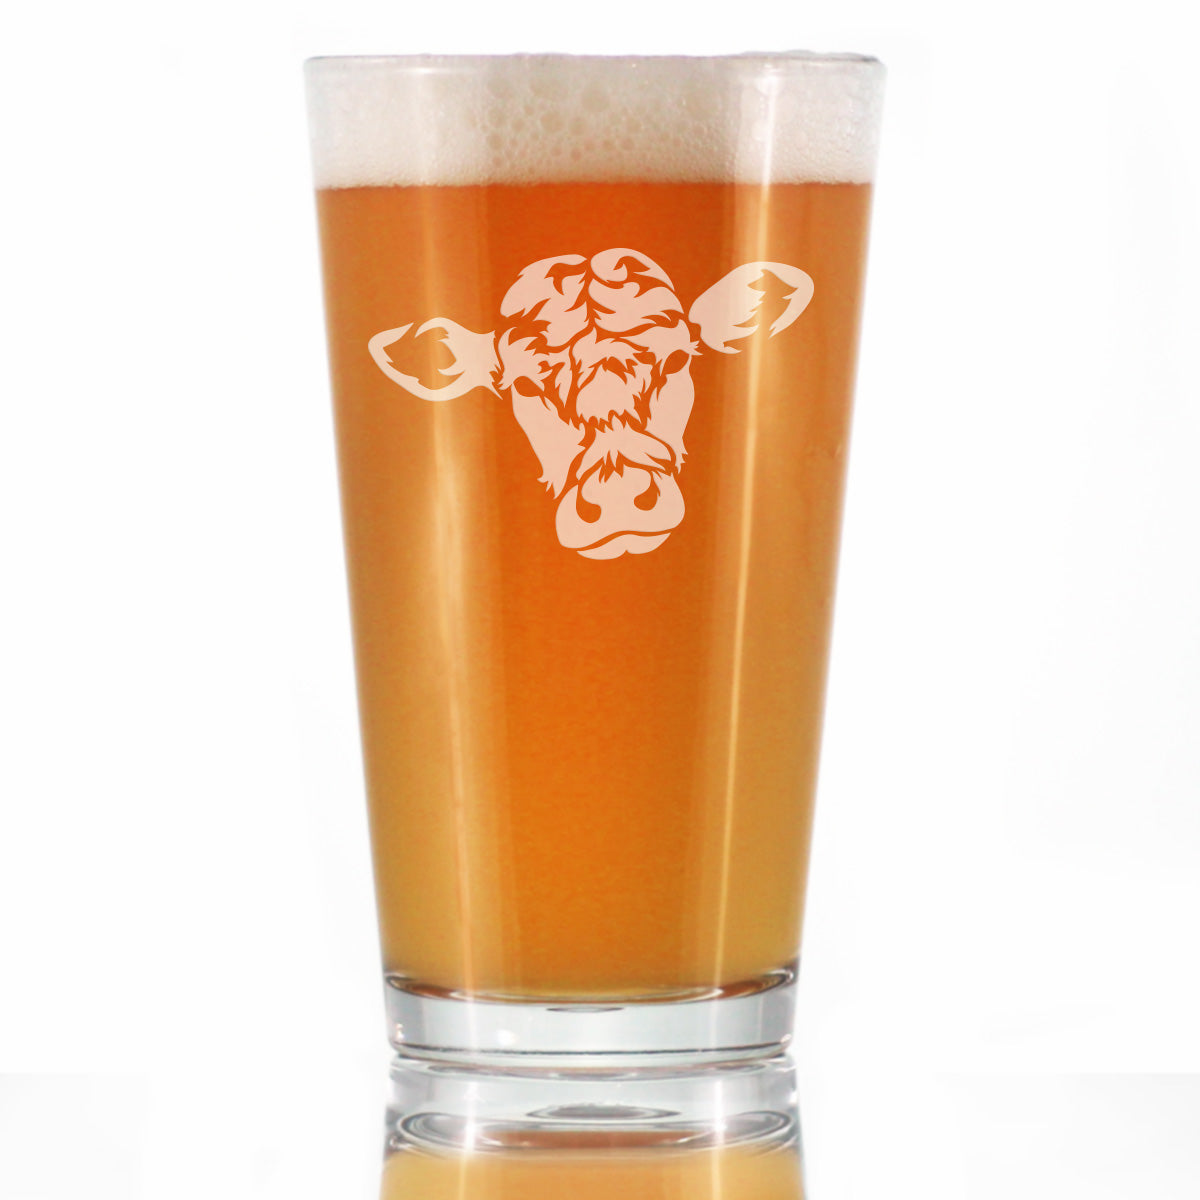 Cow Face Pint Glass for Beer - Funny Unique Farm Animal Themed Decor and Gifts for Cow Lovers - 16 oz